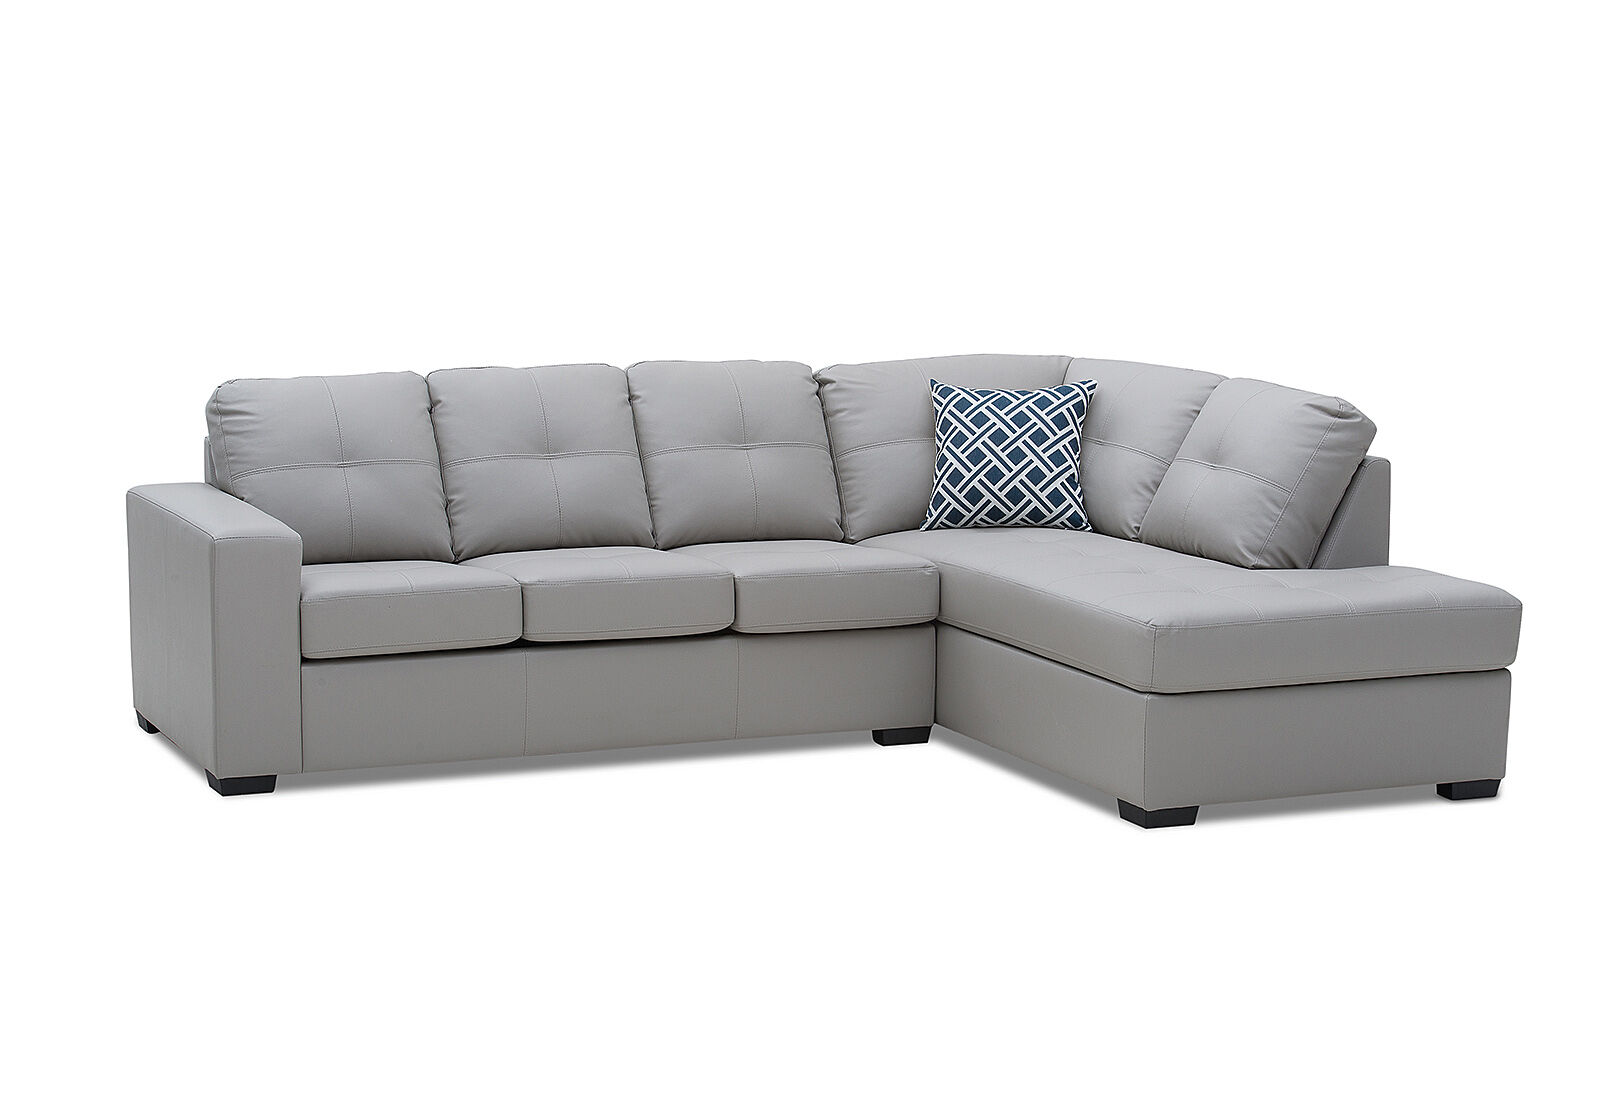 Sofa Bed Amart Furniture, Leather Sofa Bed With Chaise